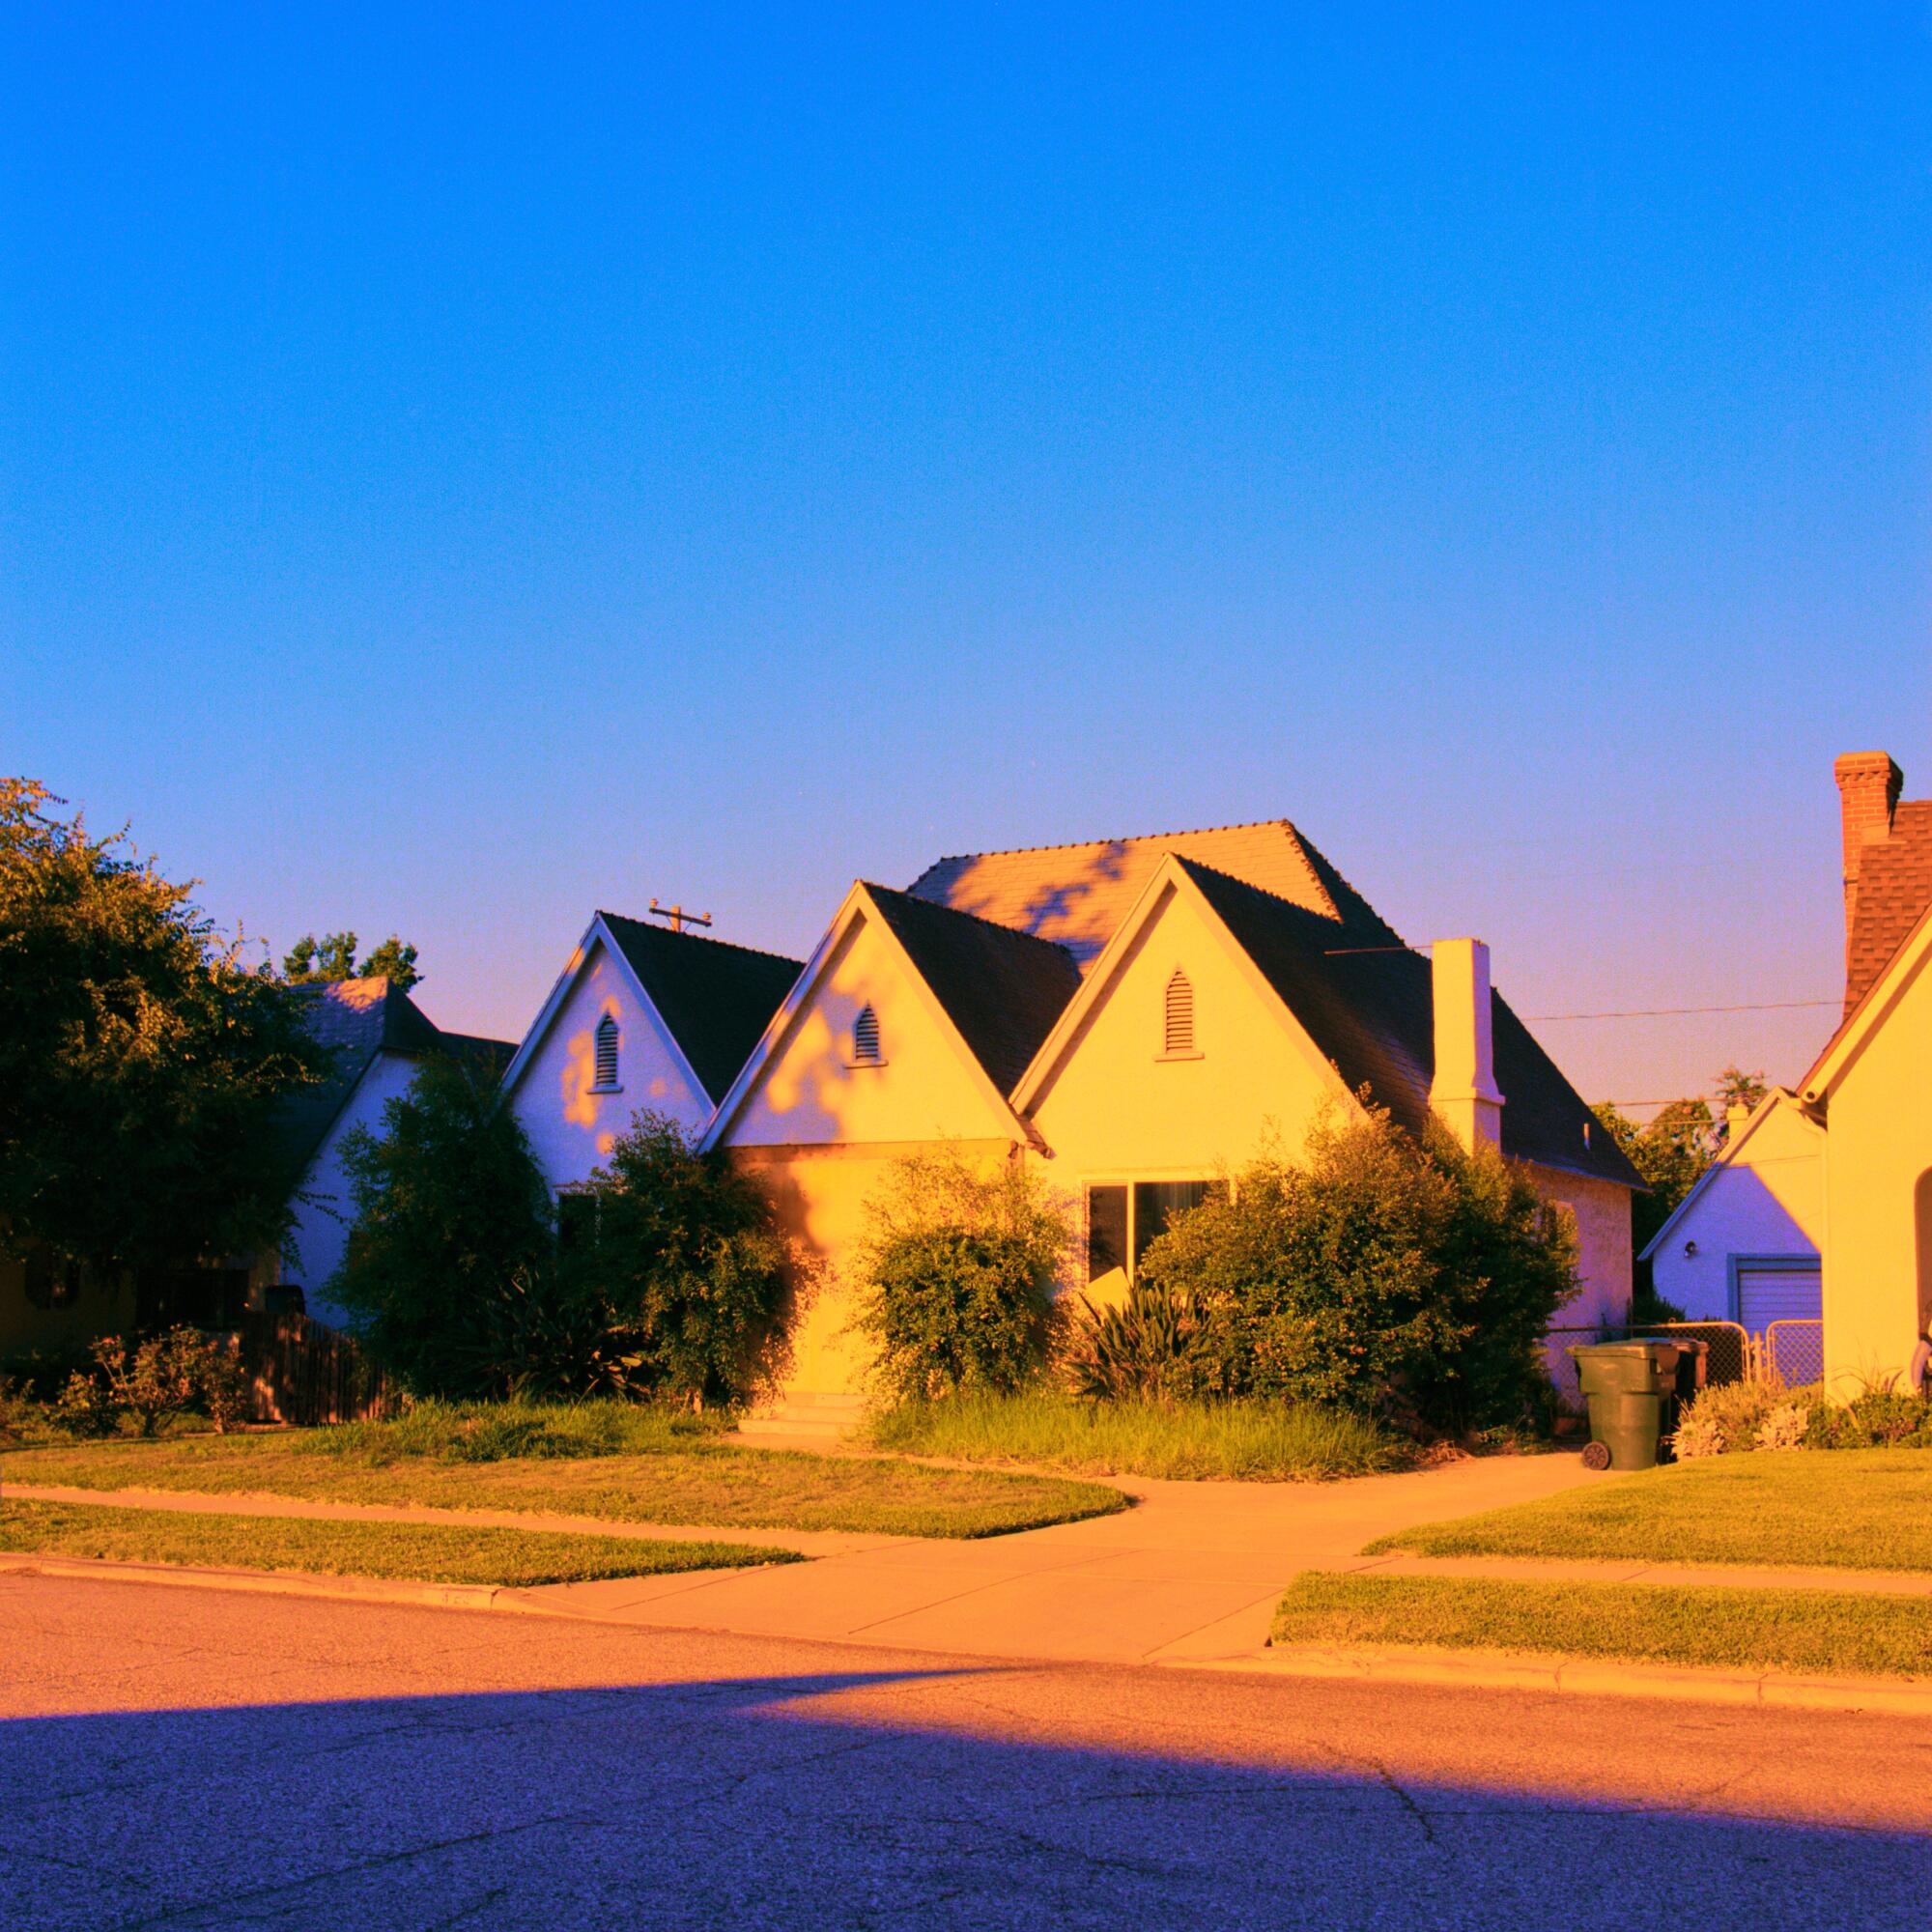 A photo of houses with triangular rooftops.